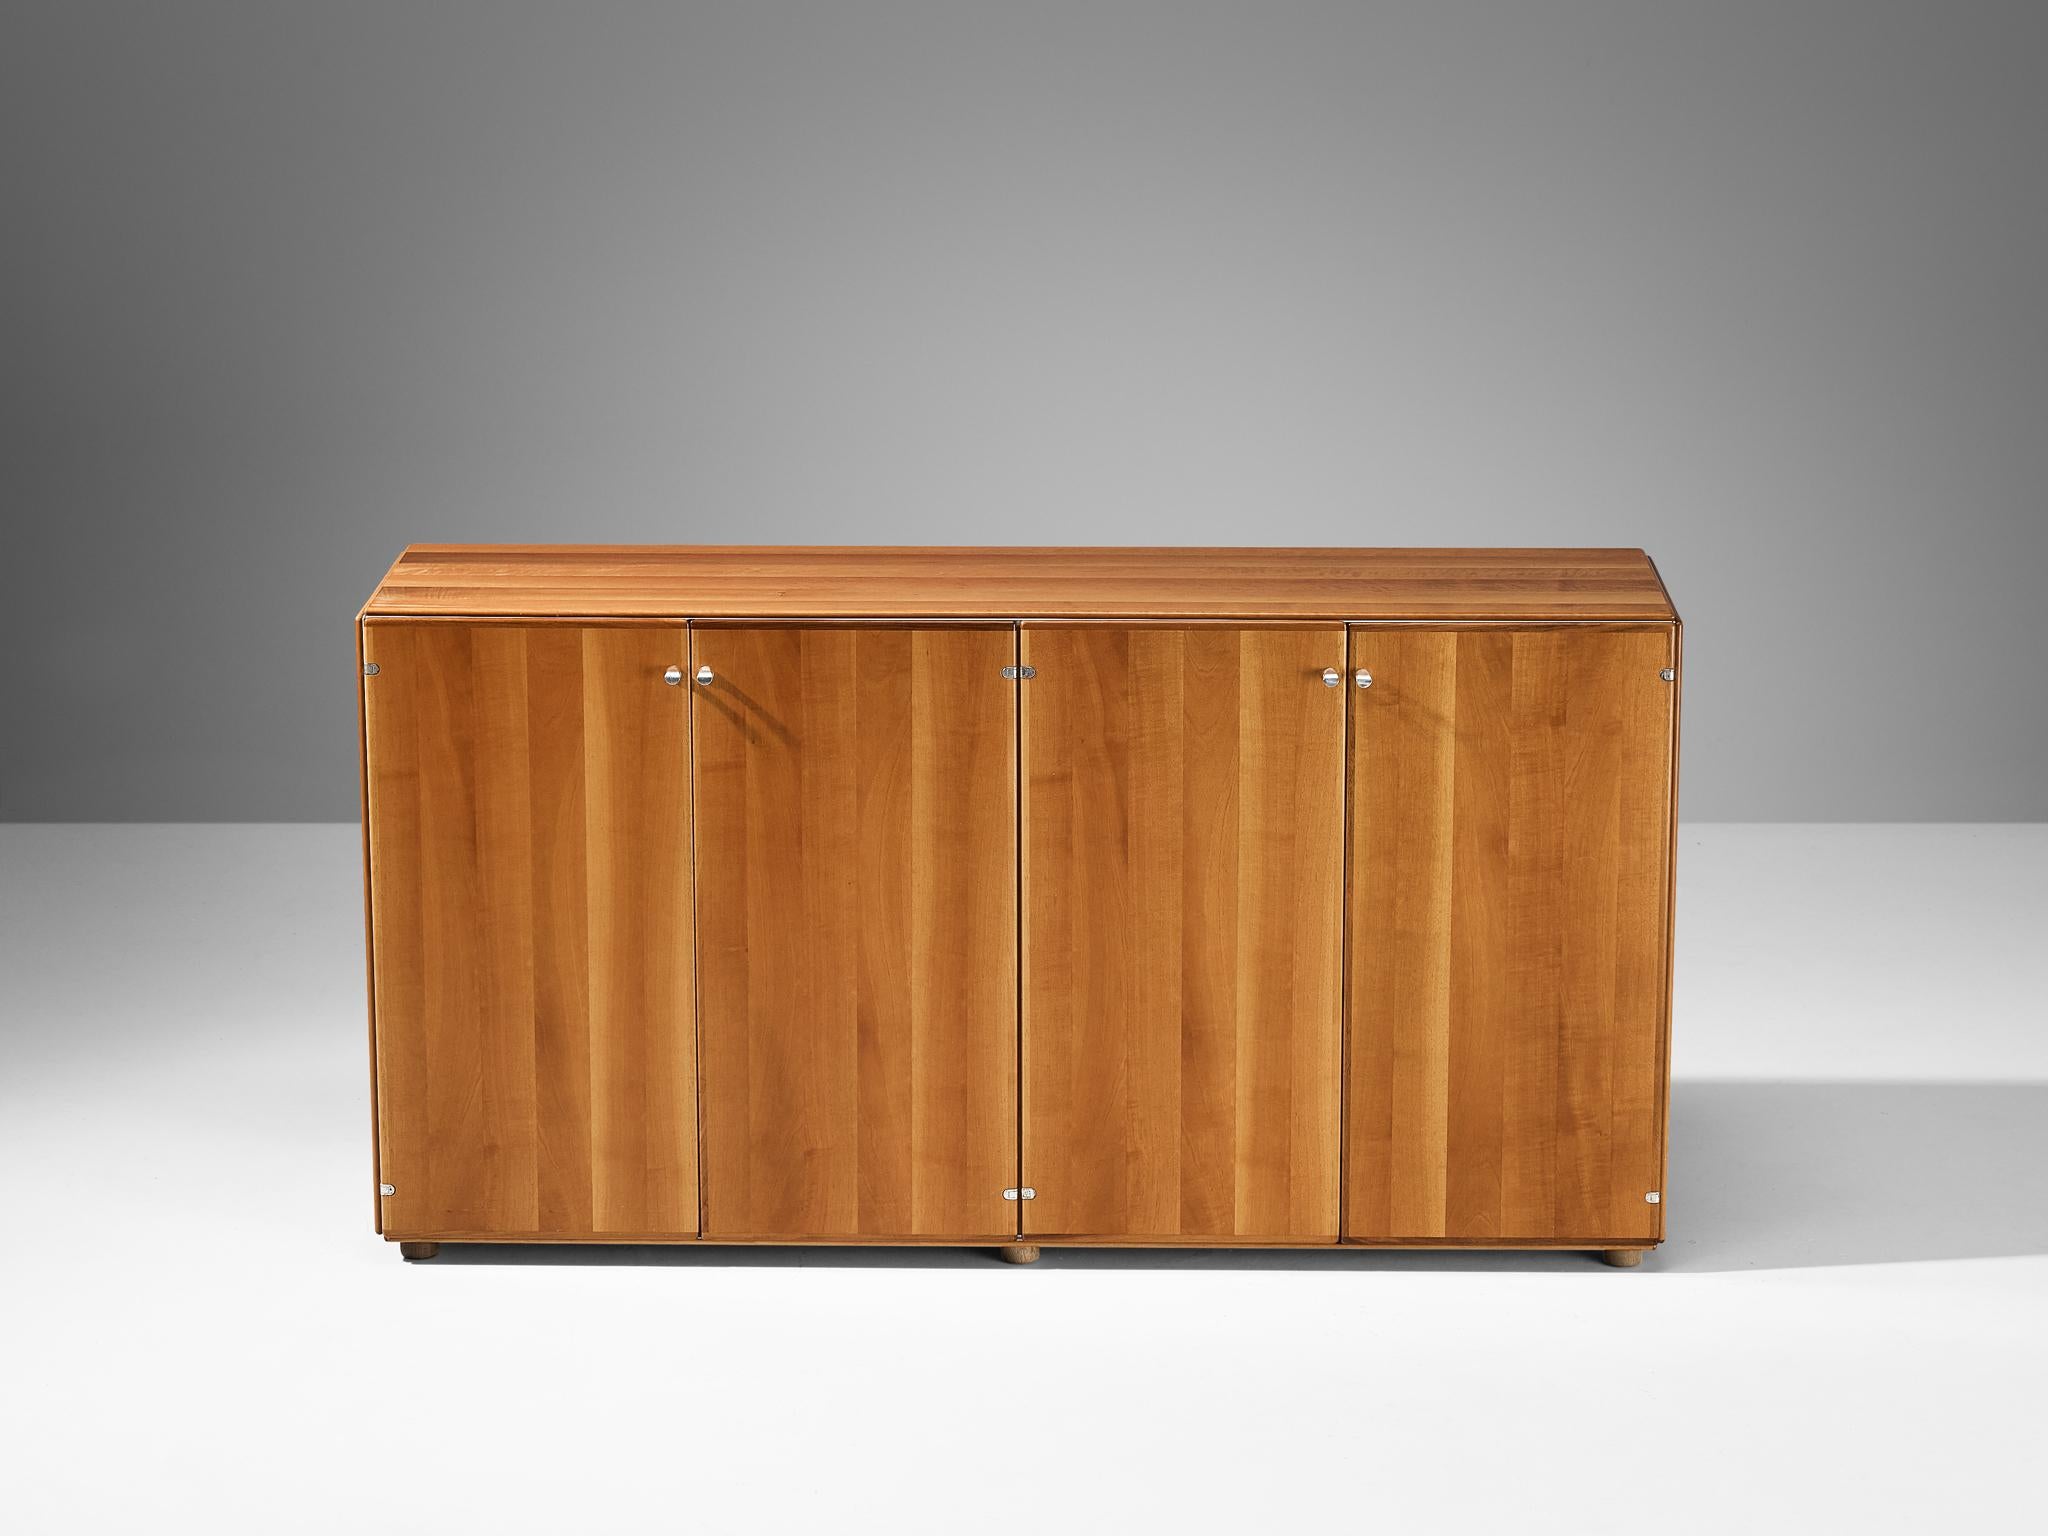 Afra & Tobia Scarpa for Stildomus, 'Torcello' sideboard, walnut, aluminum, 1964.

The 'Torcello' model is a rare find and is produced by the Italian company Stildomus, a furniture company that continuously strived in finding the perfect balance